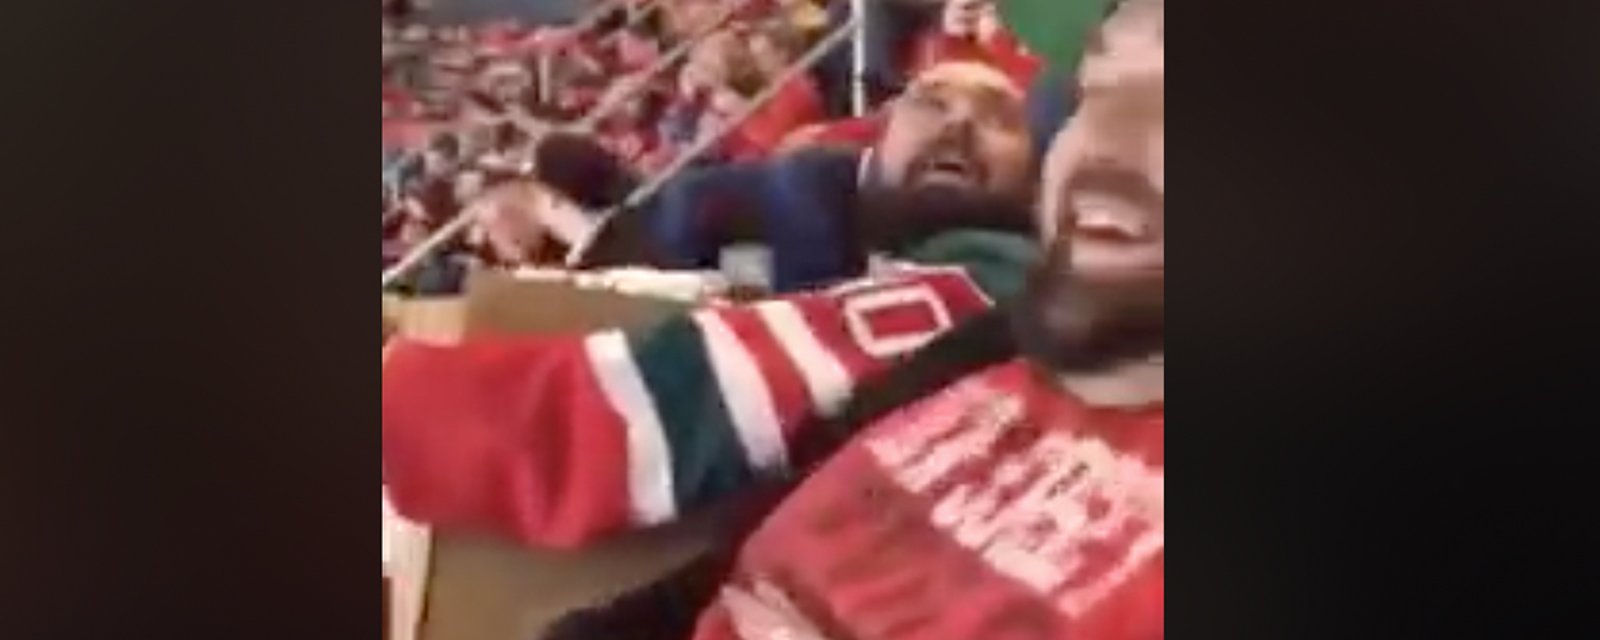 Devils fan buys 100 hot dogs, tosses them out to fans in crowd